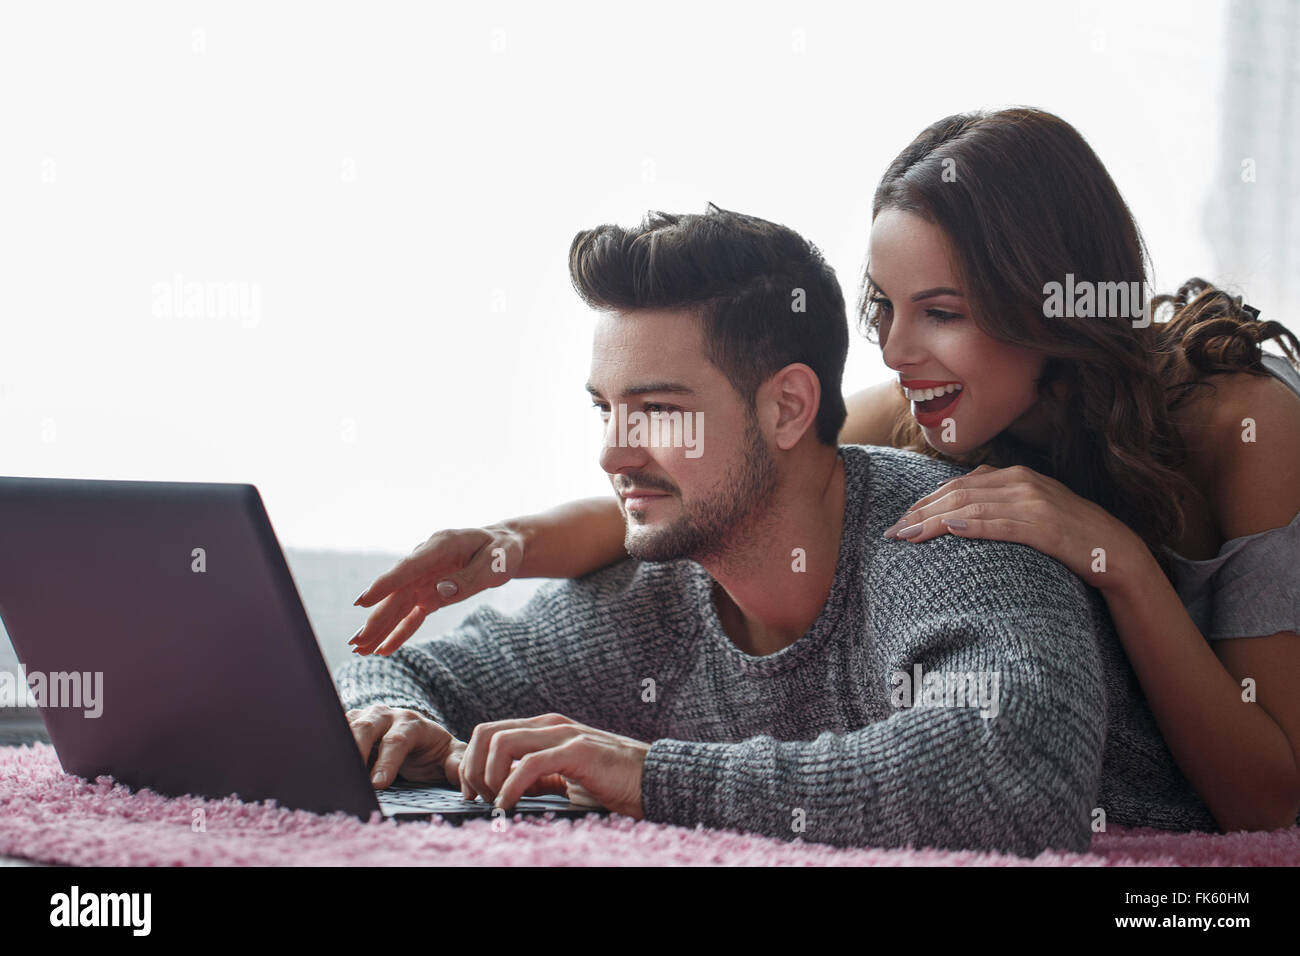 Young couple with laptop lying prone on carpet, wi-fi technology Stock Photo